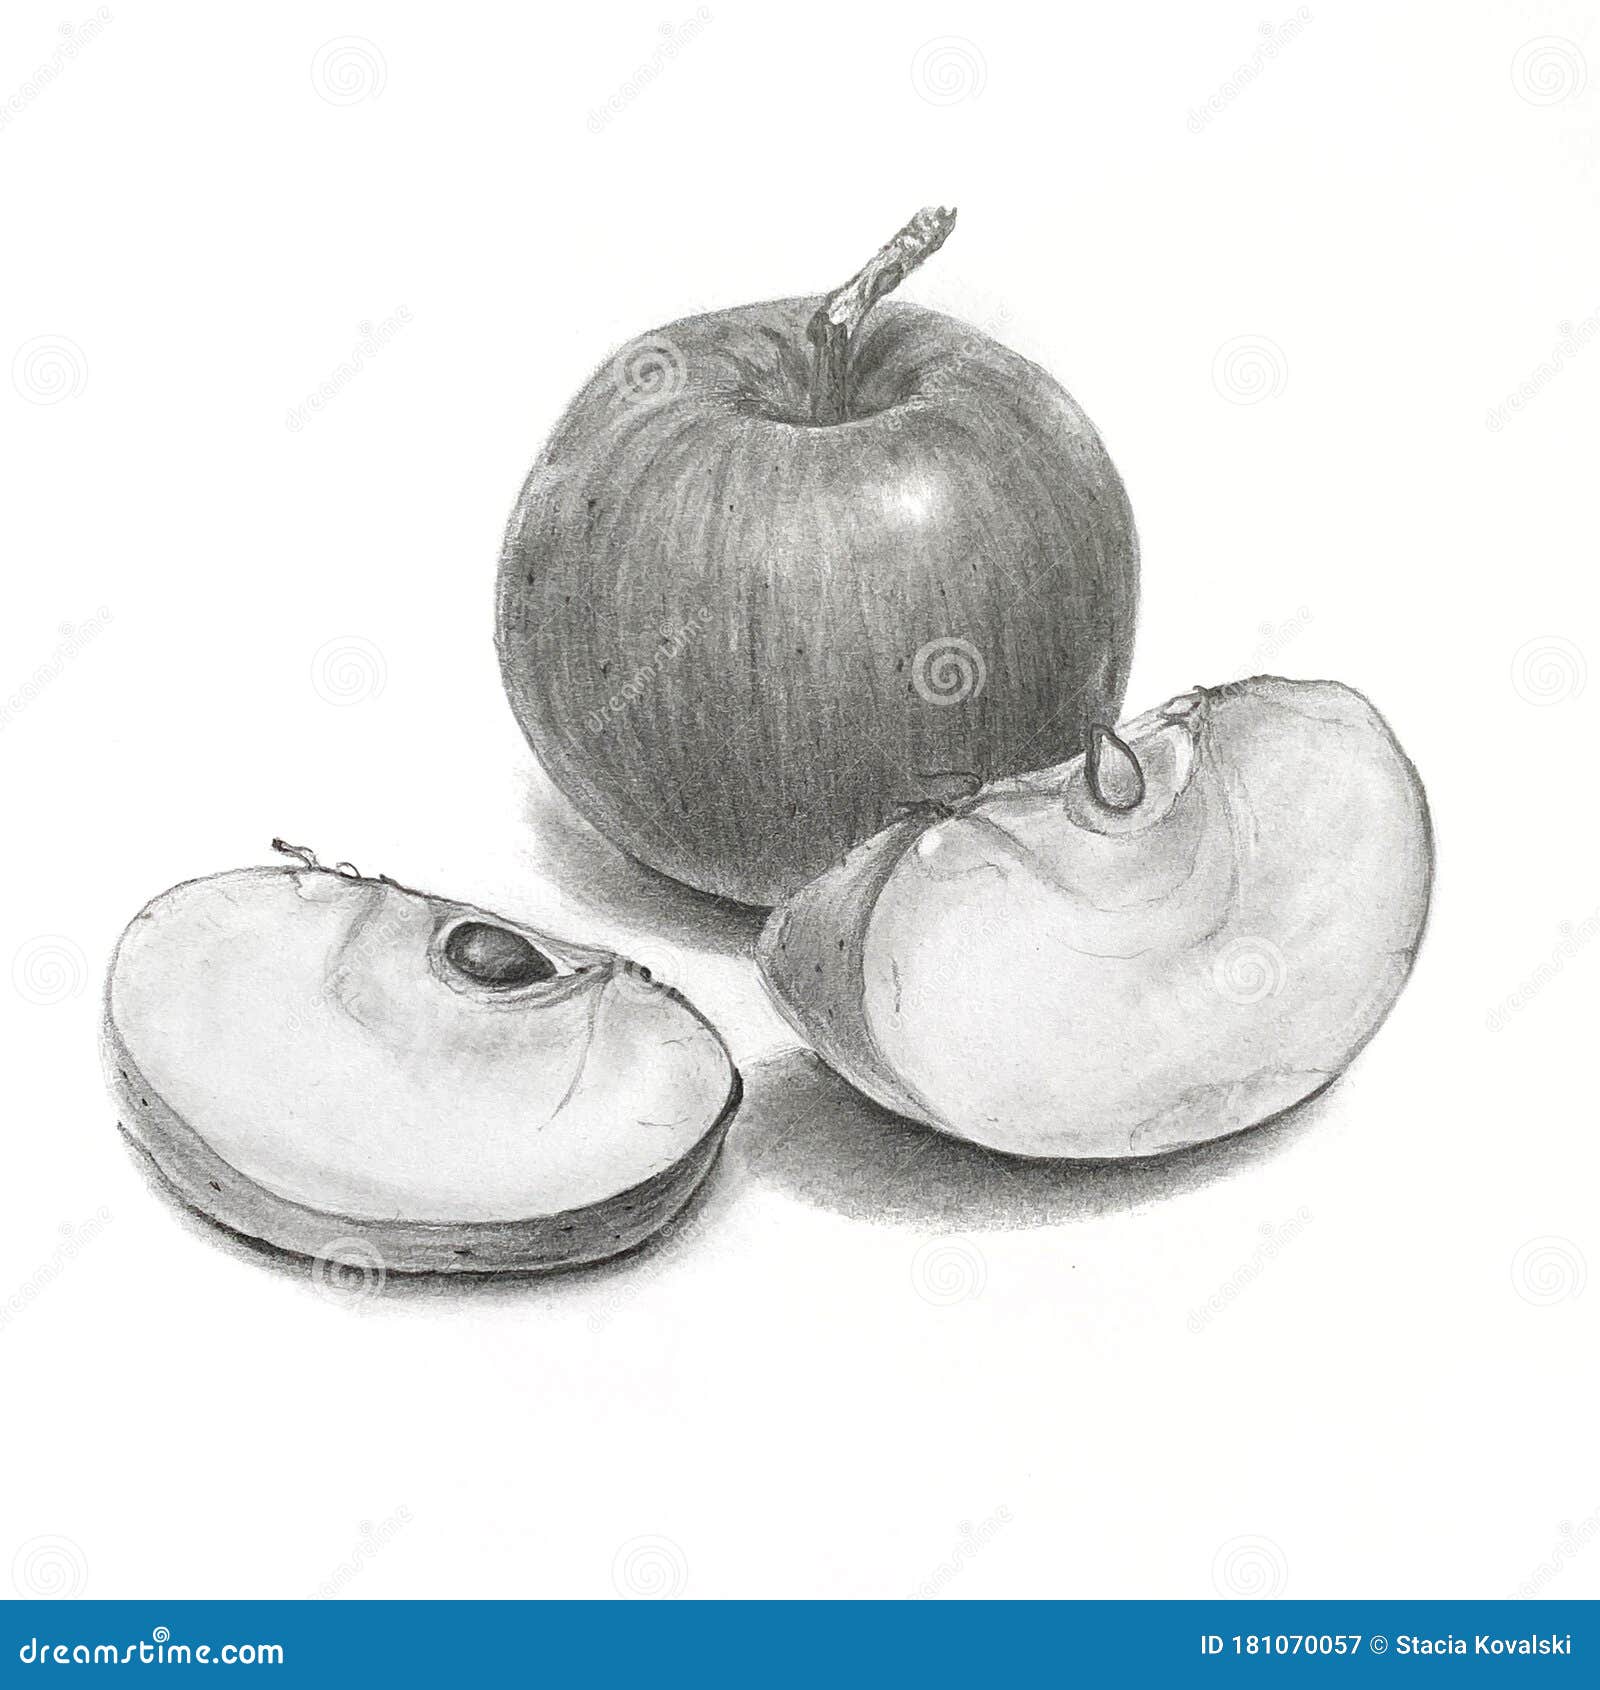 I quite enjoyed the process of drawing the first apple. It was nice to come  back to simple graphite drawing after a few years of doing digital work.  The first one I